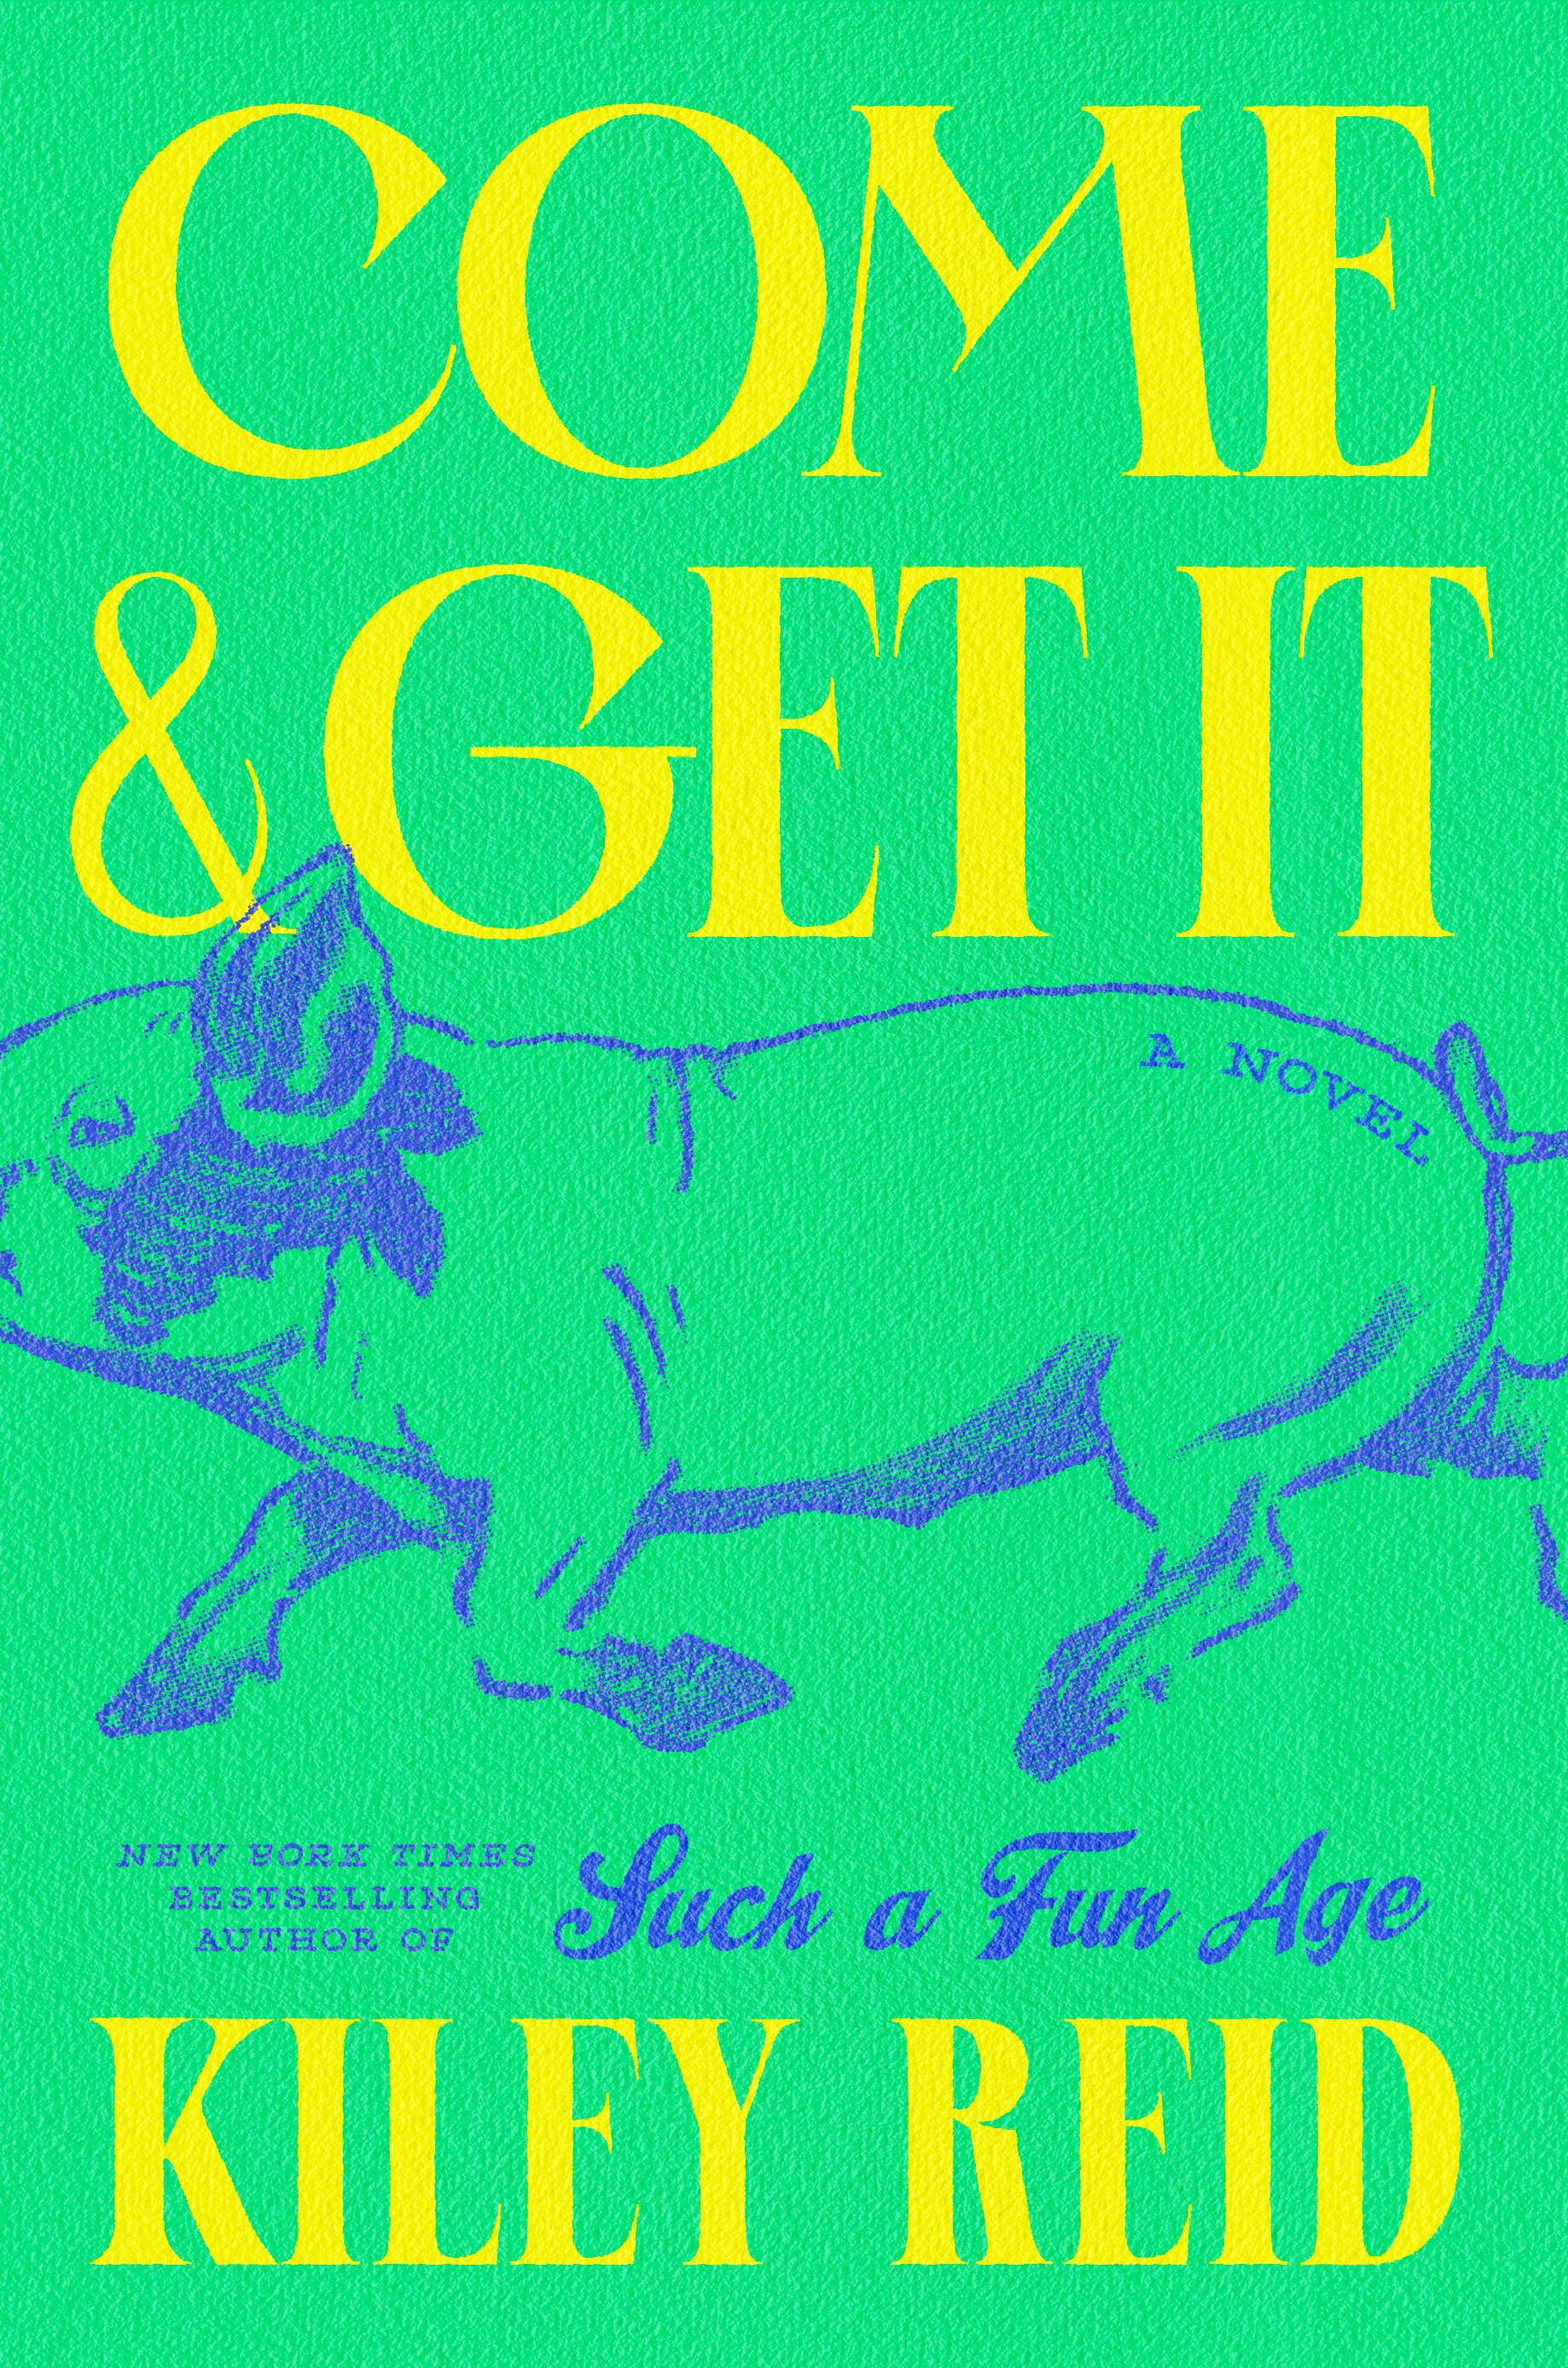 A bright green book cover reads “Come and Get It,” by Kiley Reid, with a line drawing of a pig and old-fashioned type.